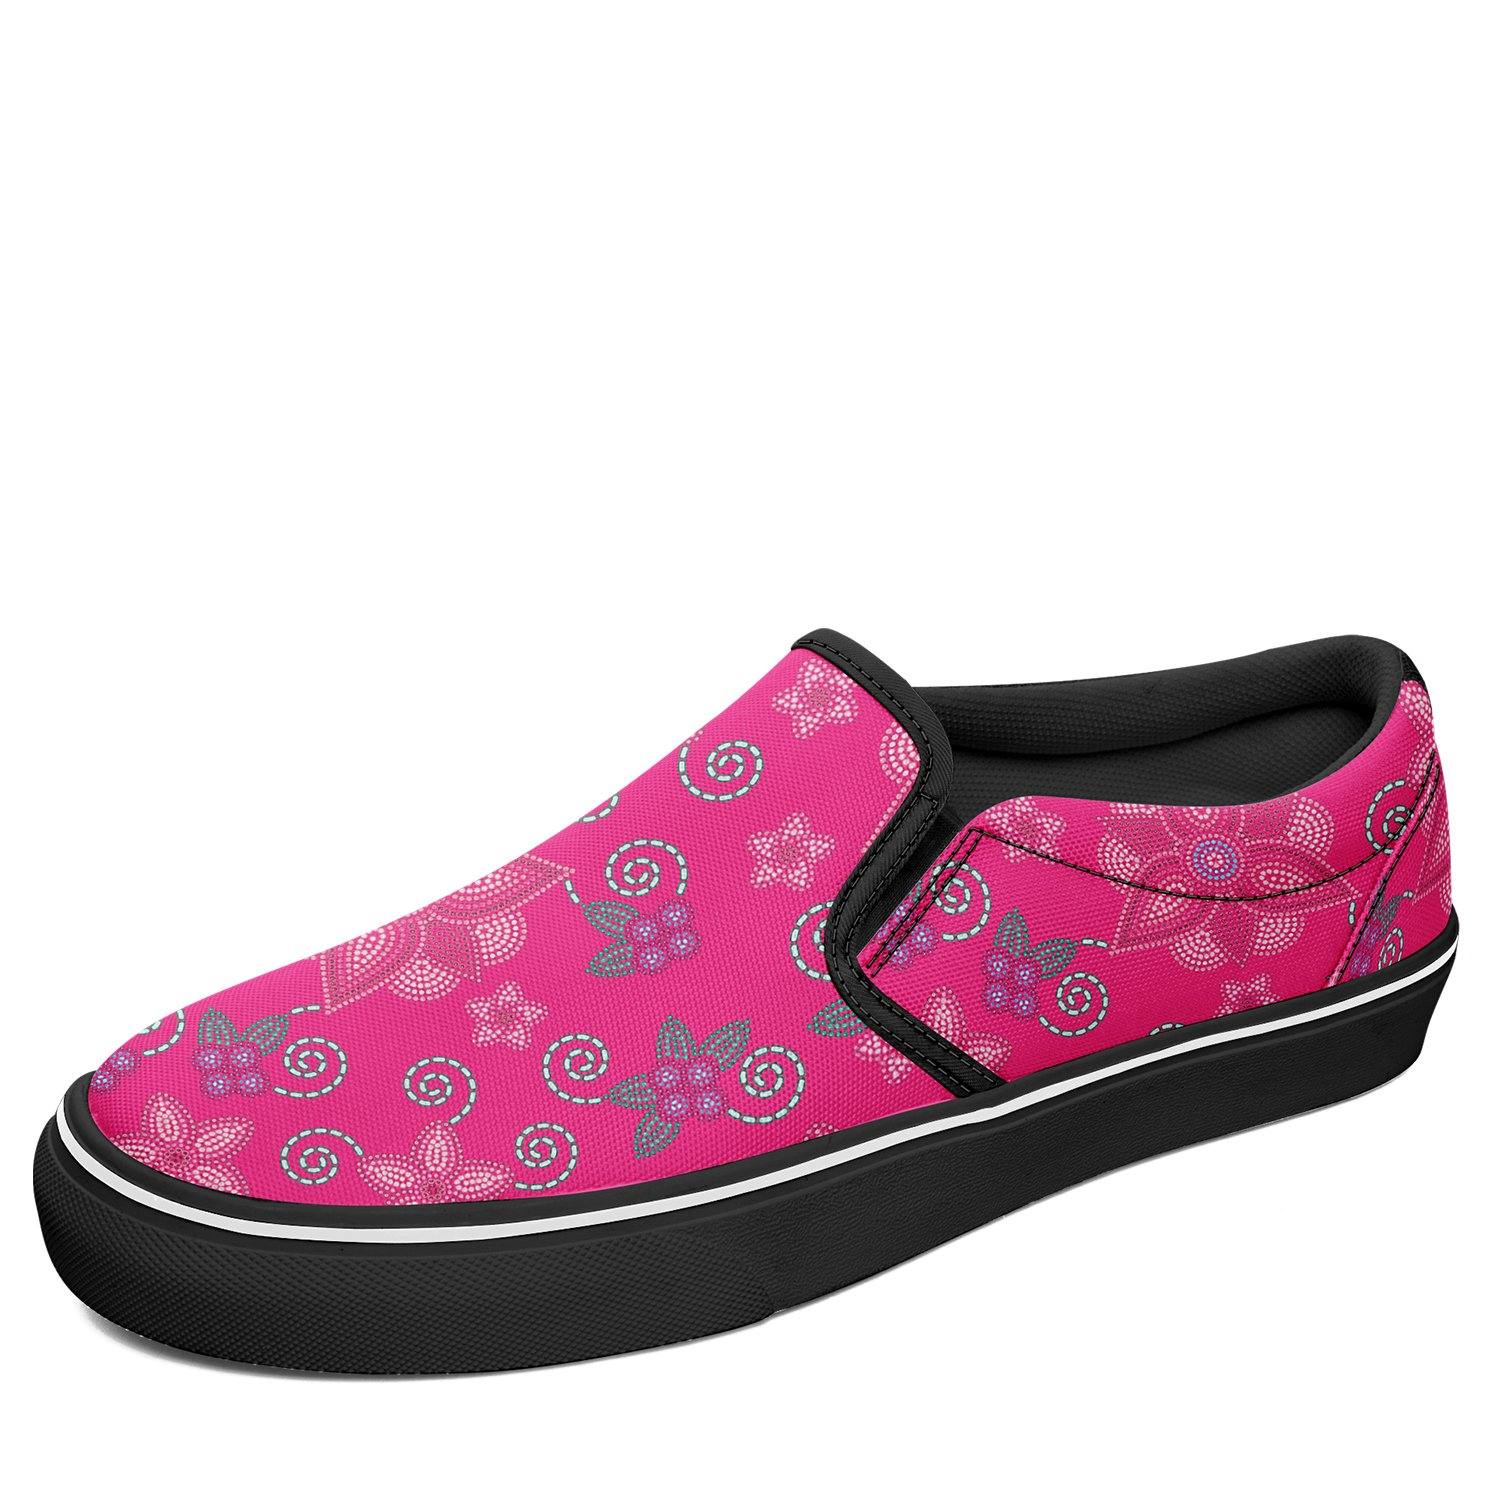 Otoyimm Kids Canvas Slip Shoes On